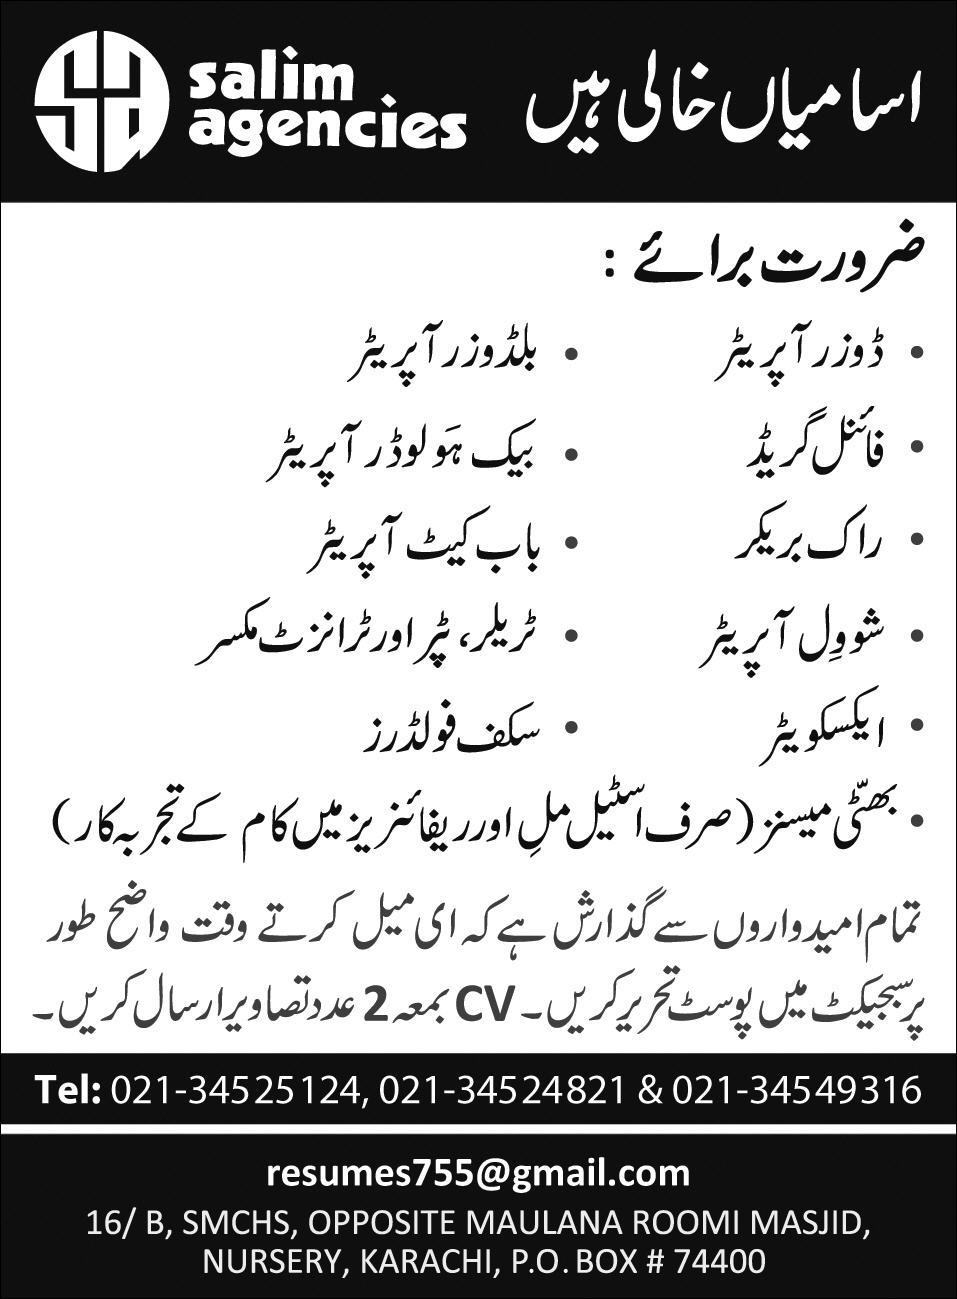 Technical Operators Required at Salim Agencies